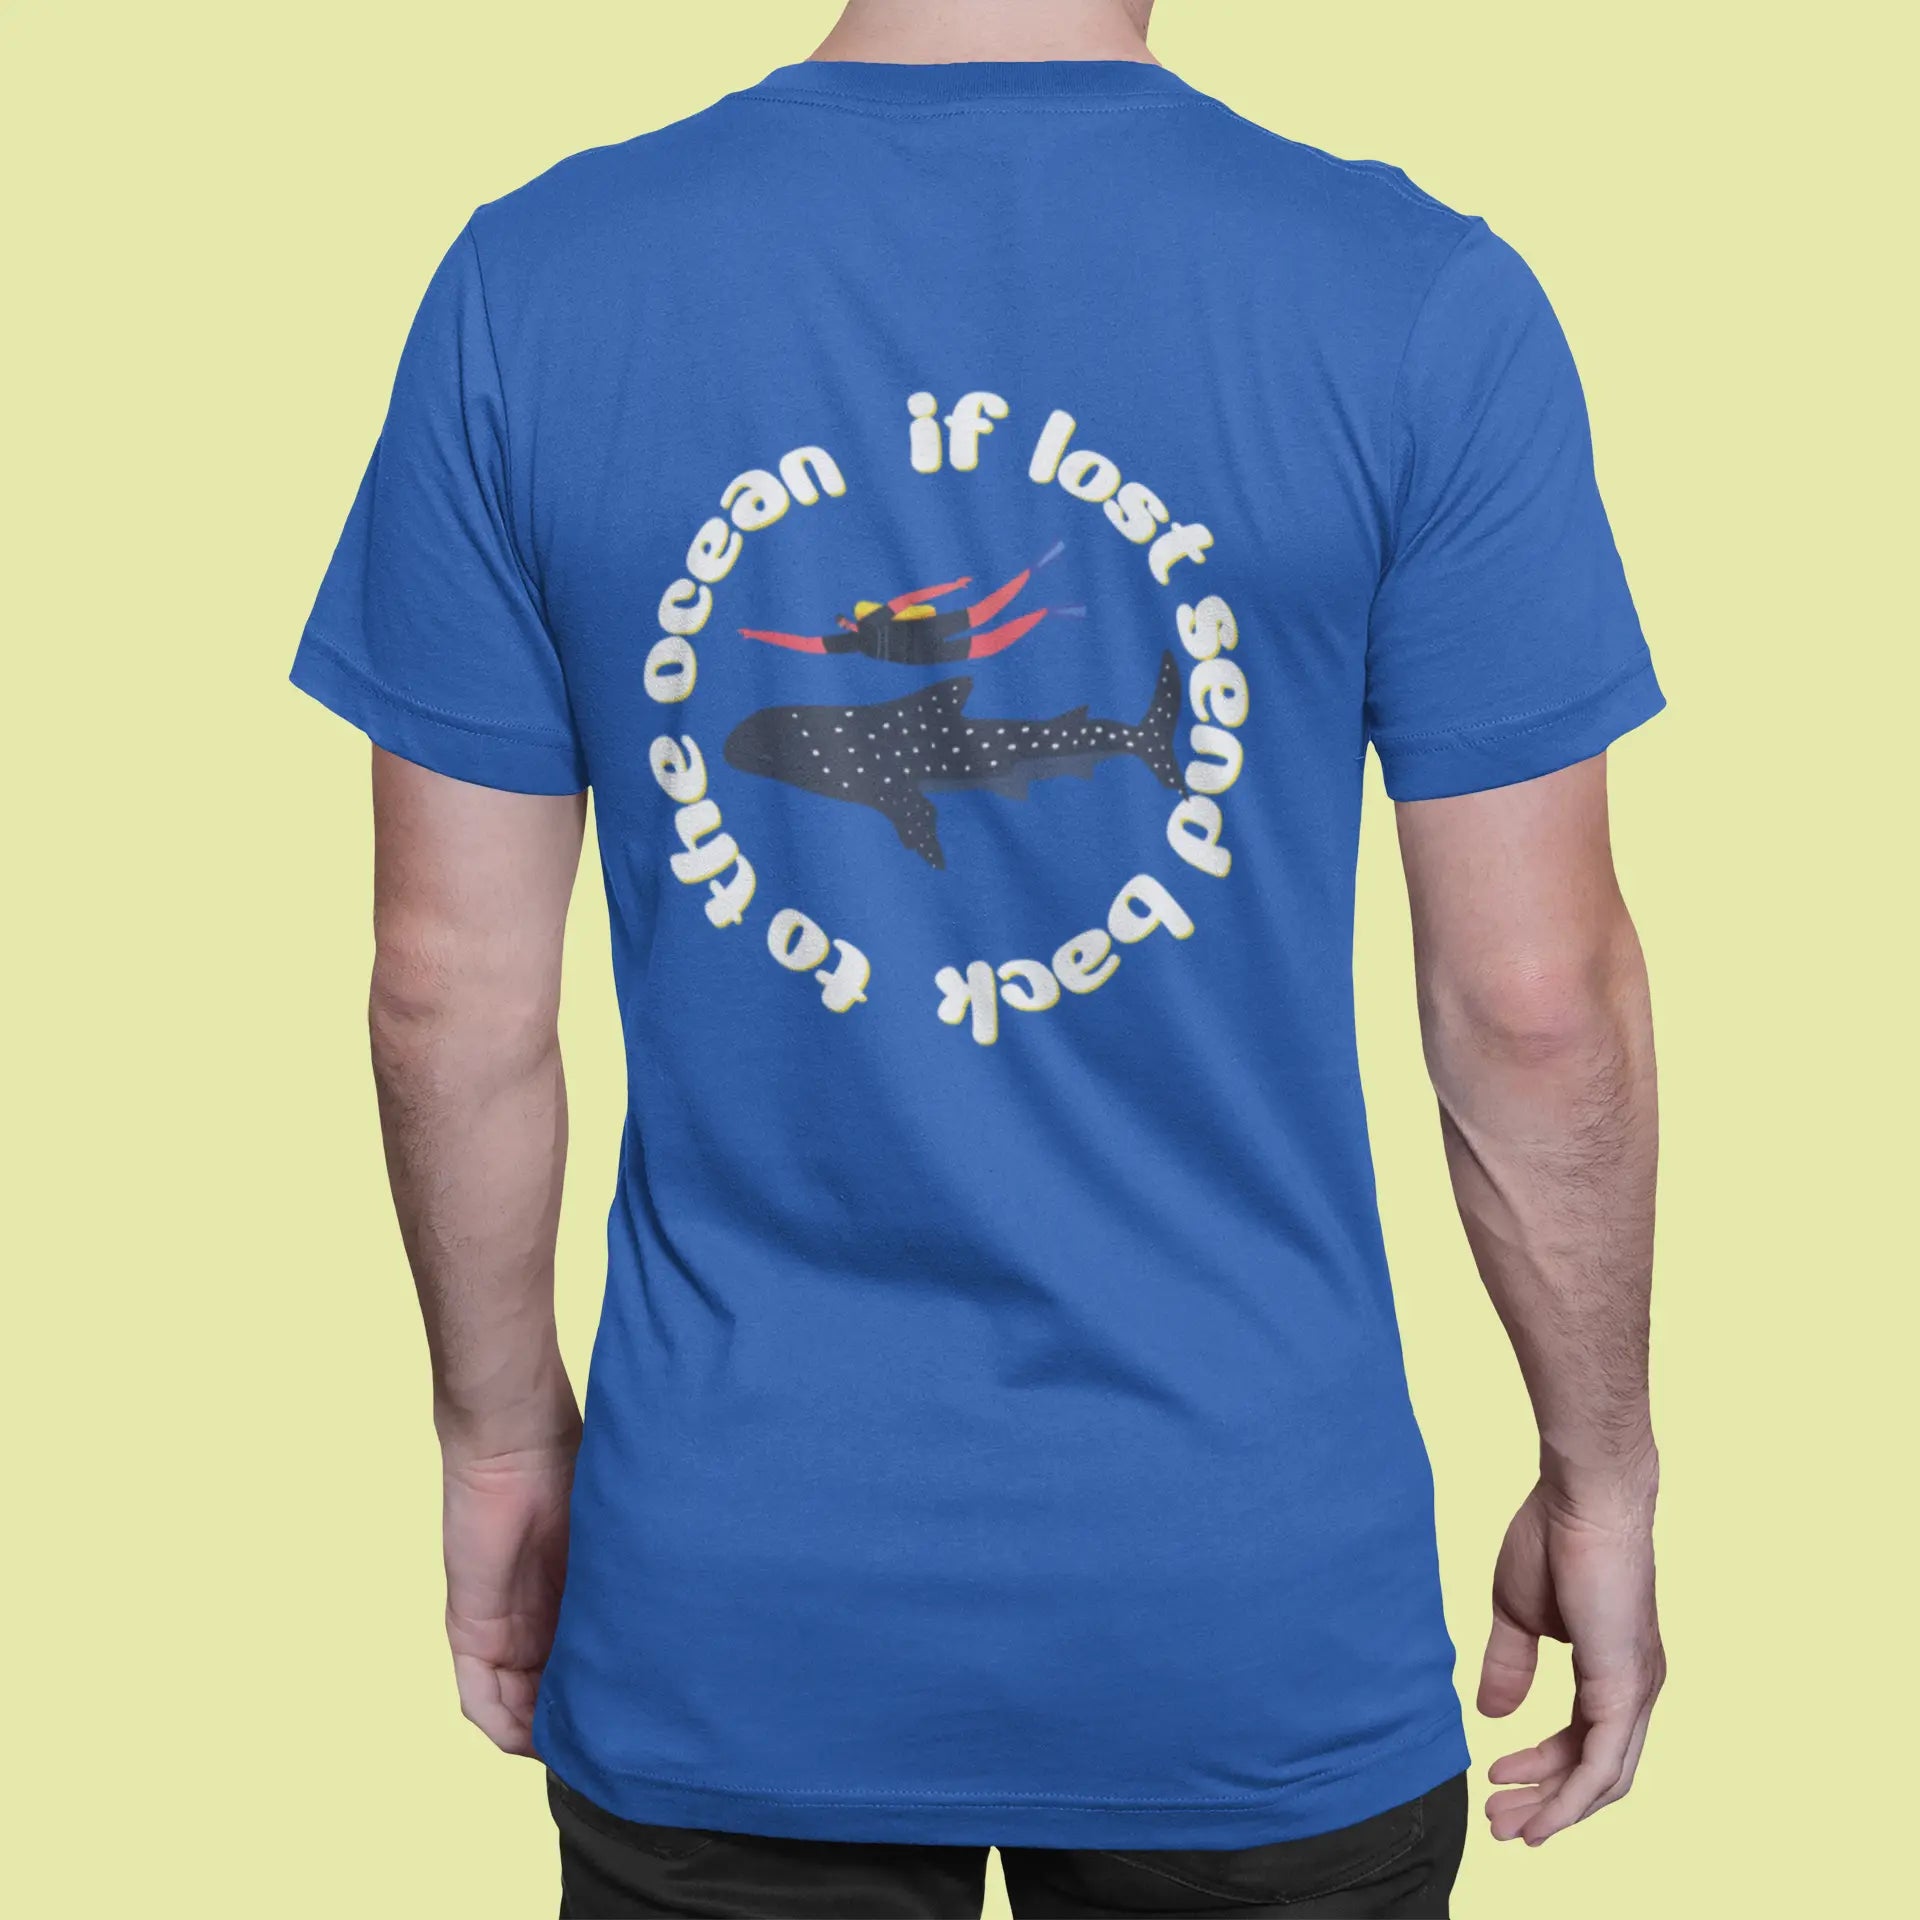 t-shirt for divers